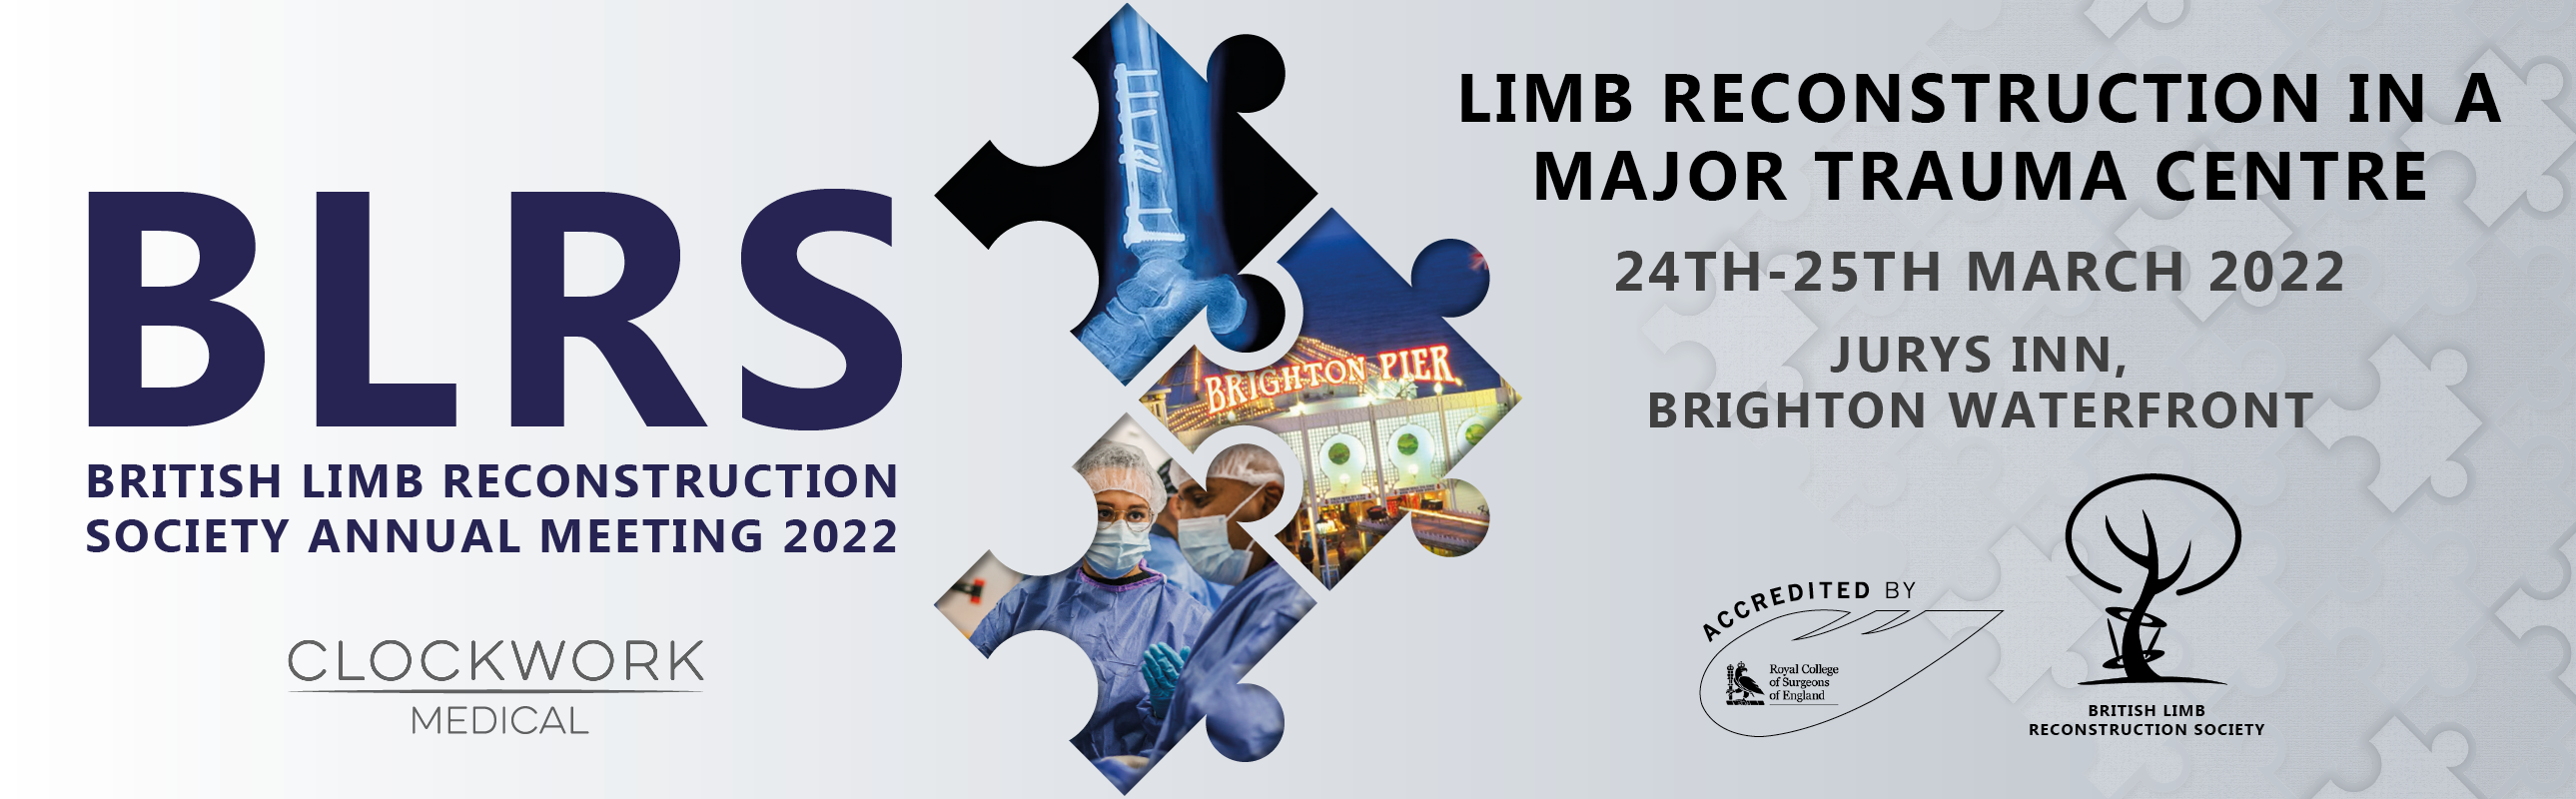 Dr D.Giotikas at the Annual Conference of British Limb Reconstruction Society, March 2022, Brighton, UK